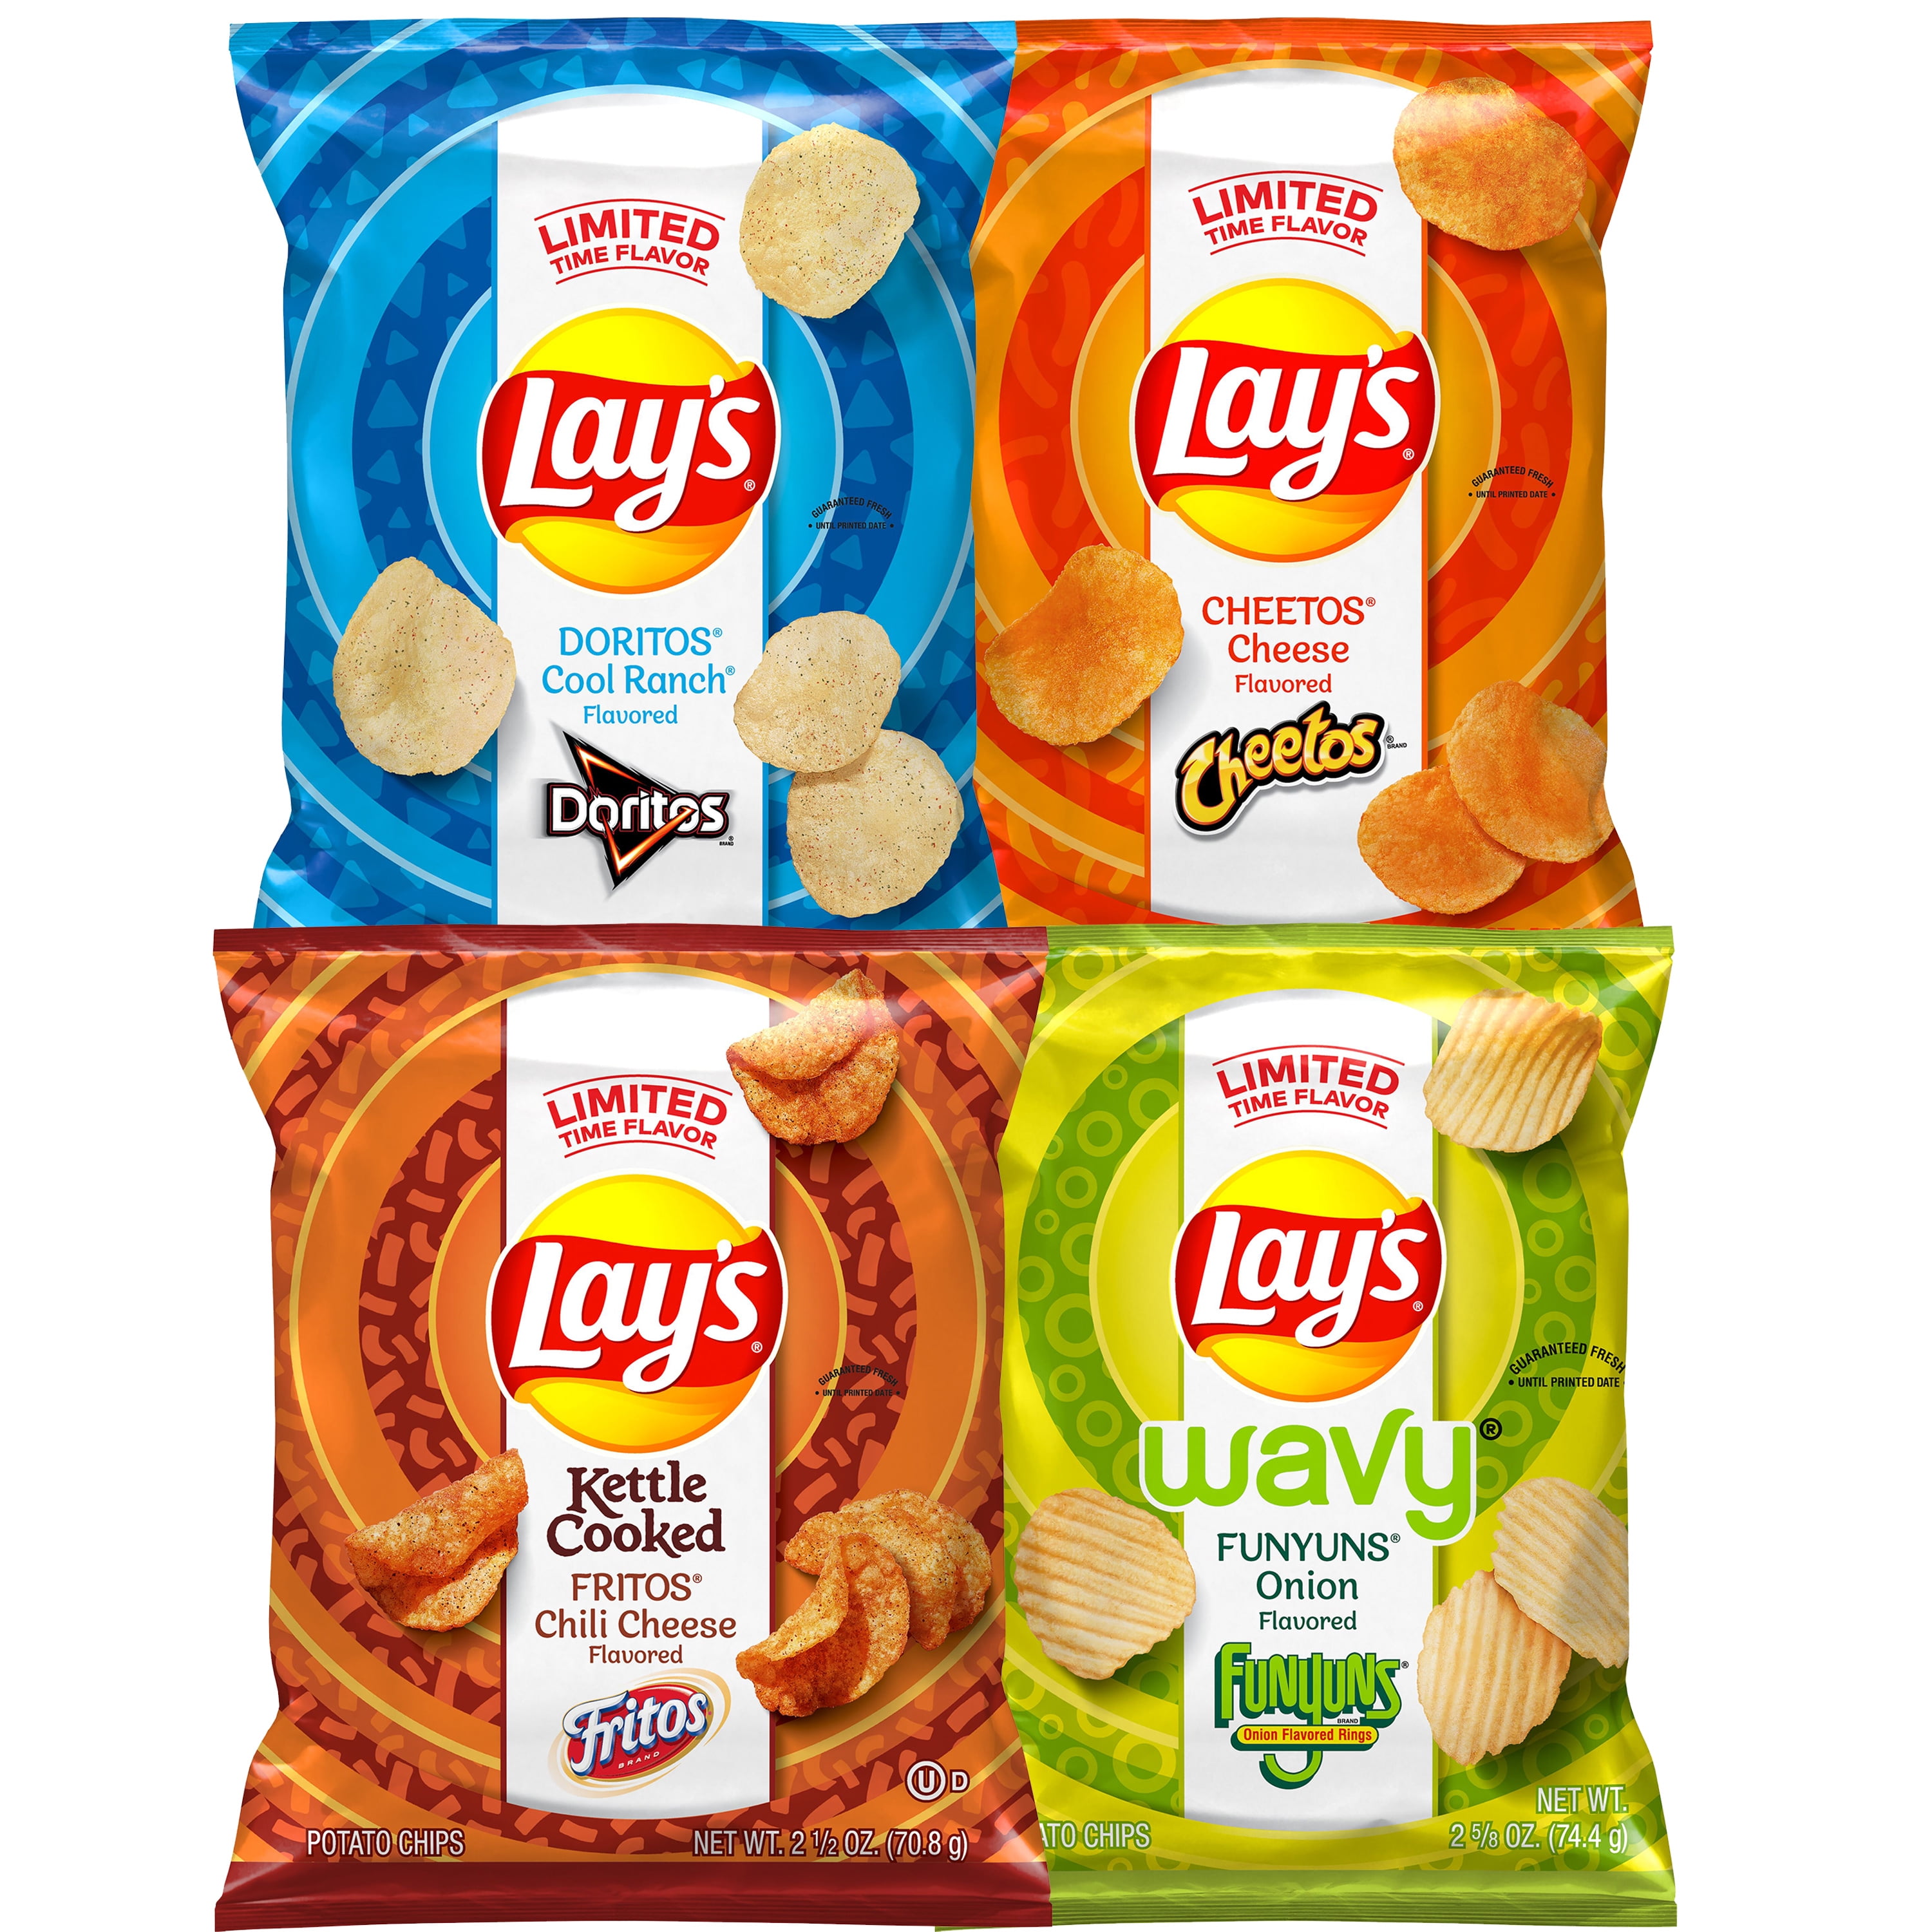 Limited Edition Lay’s Flavor Swap Variety Pack, 8 Count